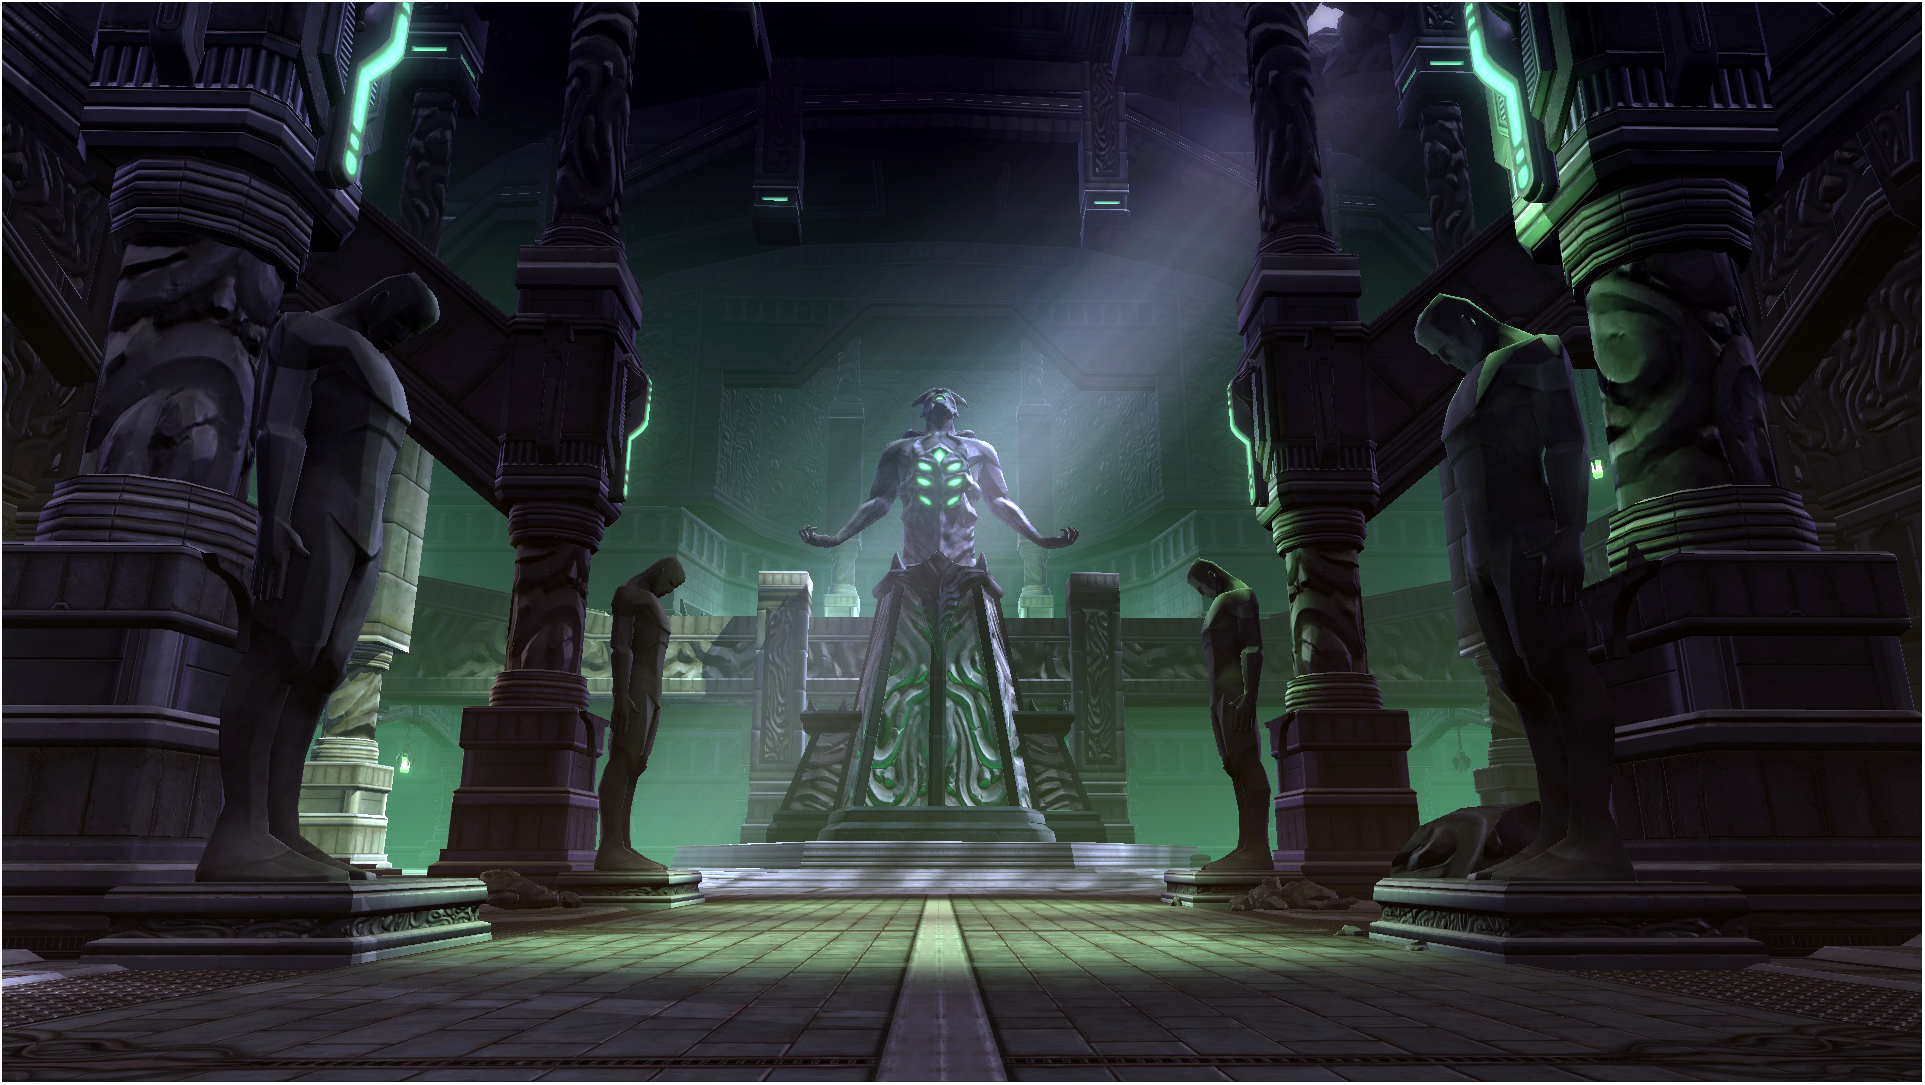 Sith Wallpaper 1080p Location a sith temple in